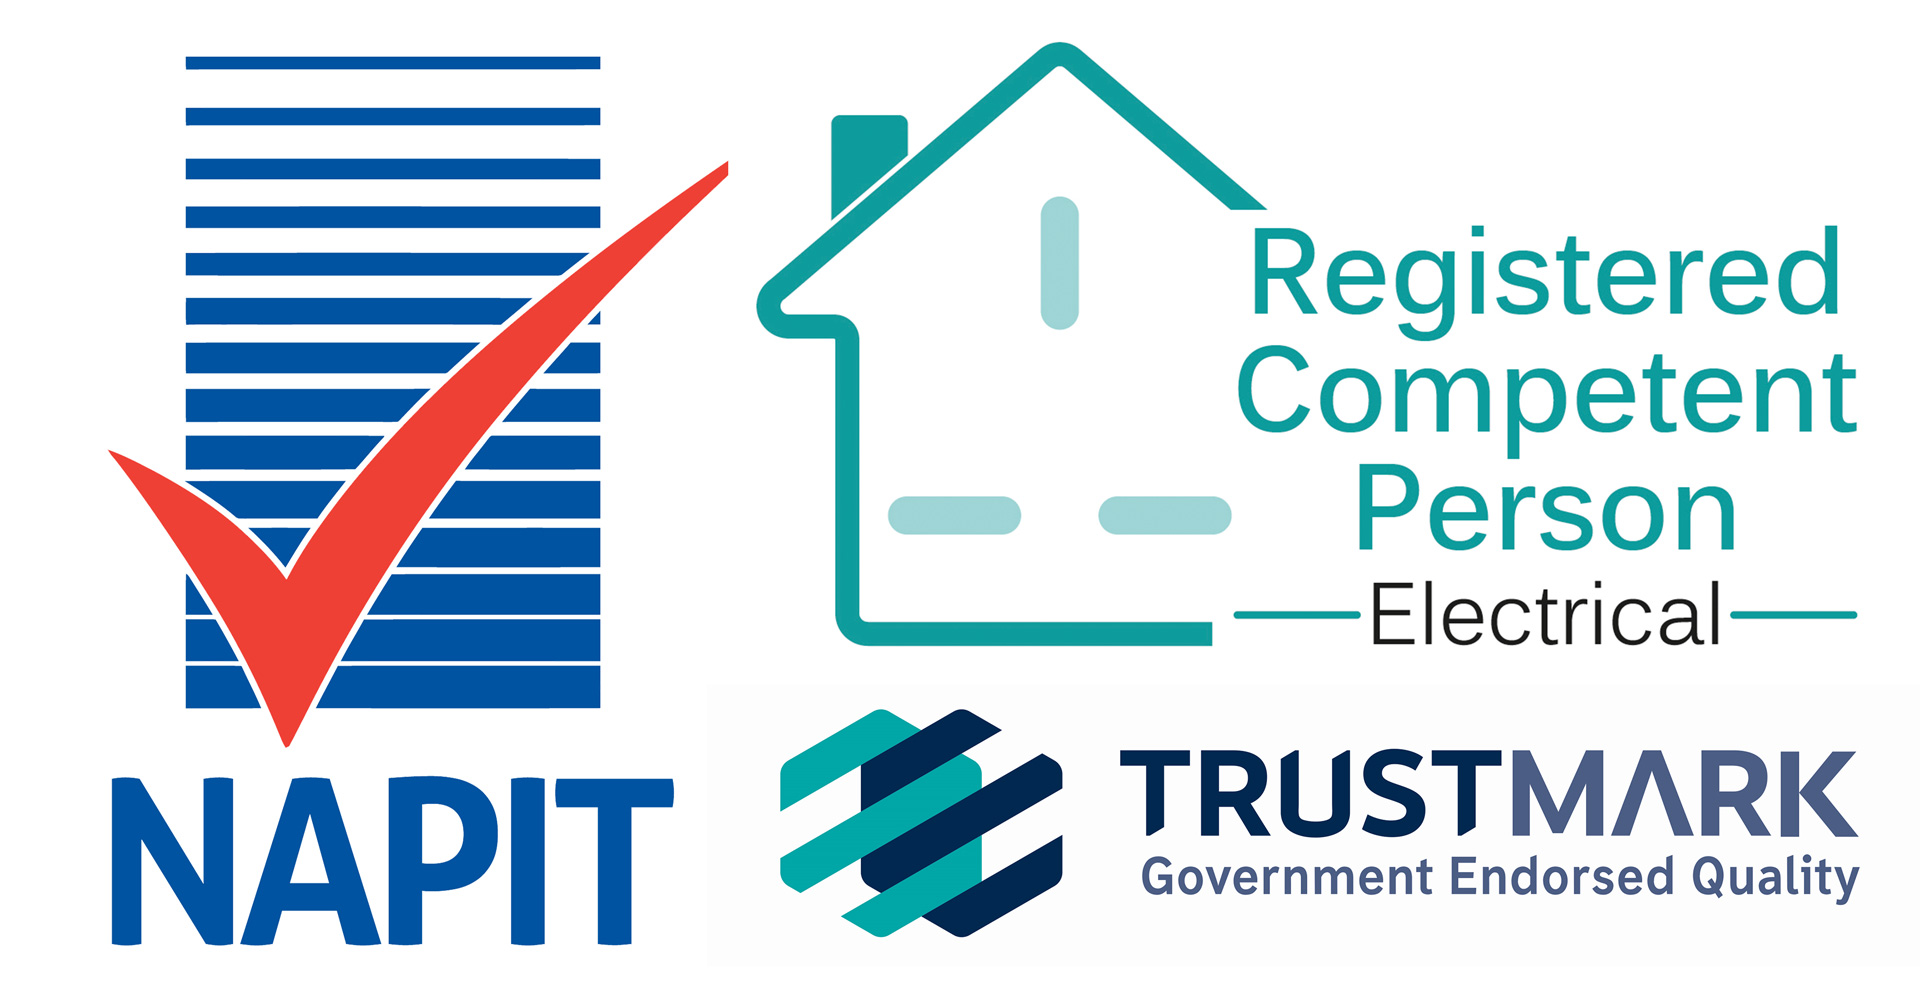 NAPIT Approved Registered Competent Person Trustmark